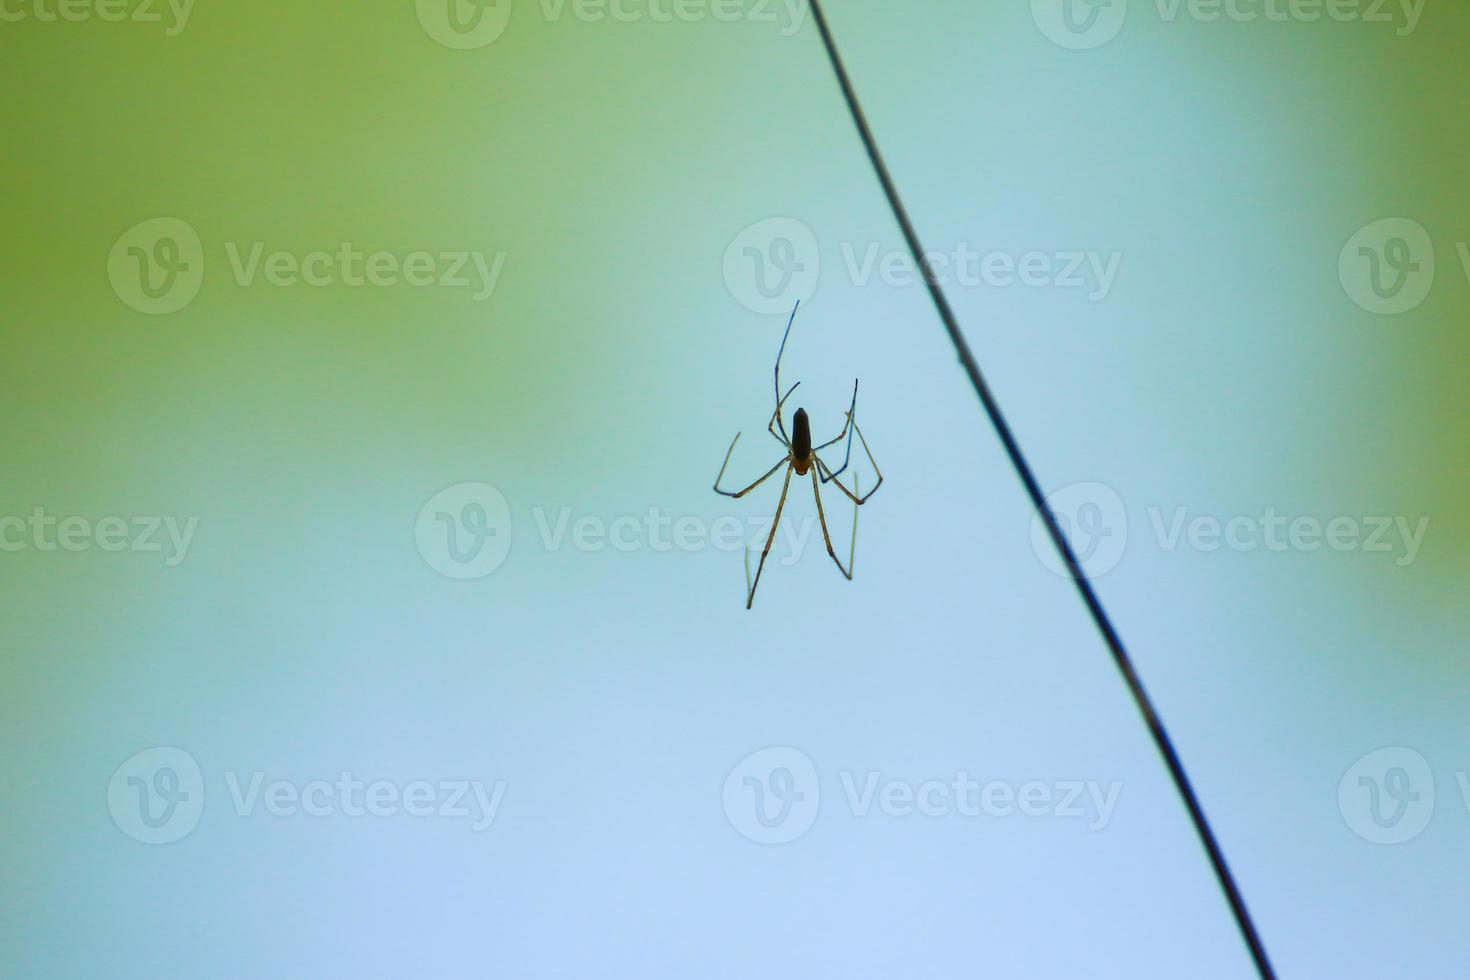 spider silhouette in the grass on green background photo